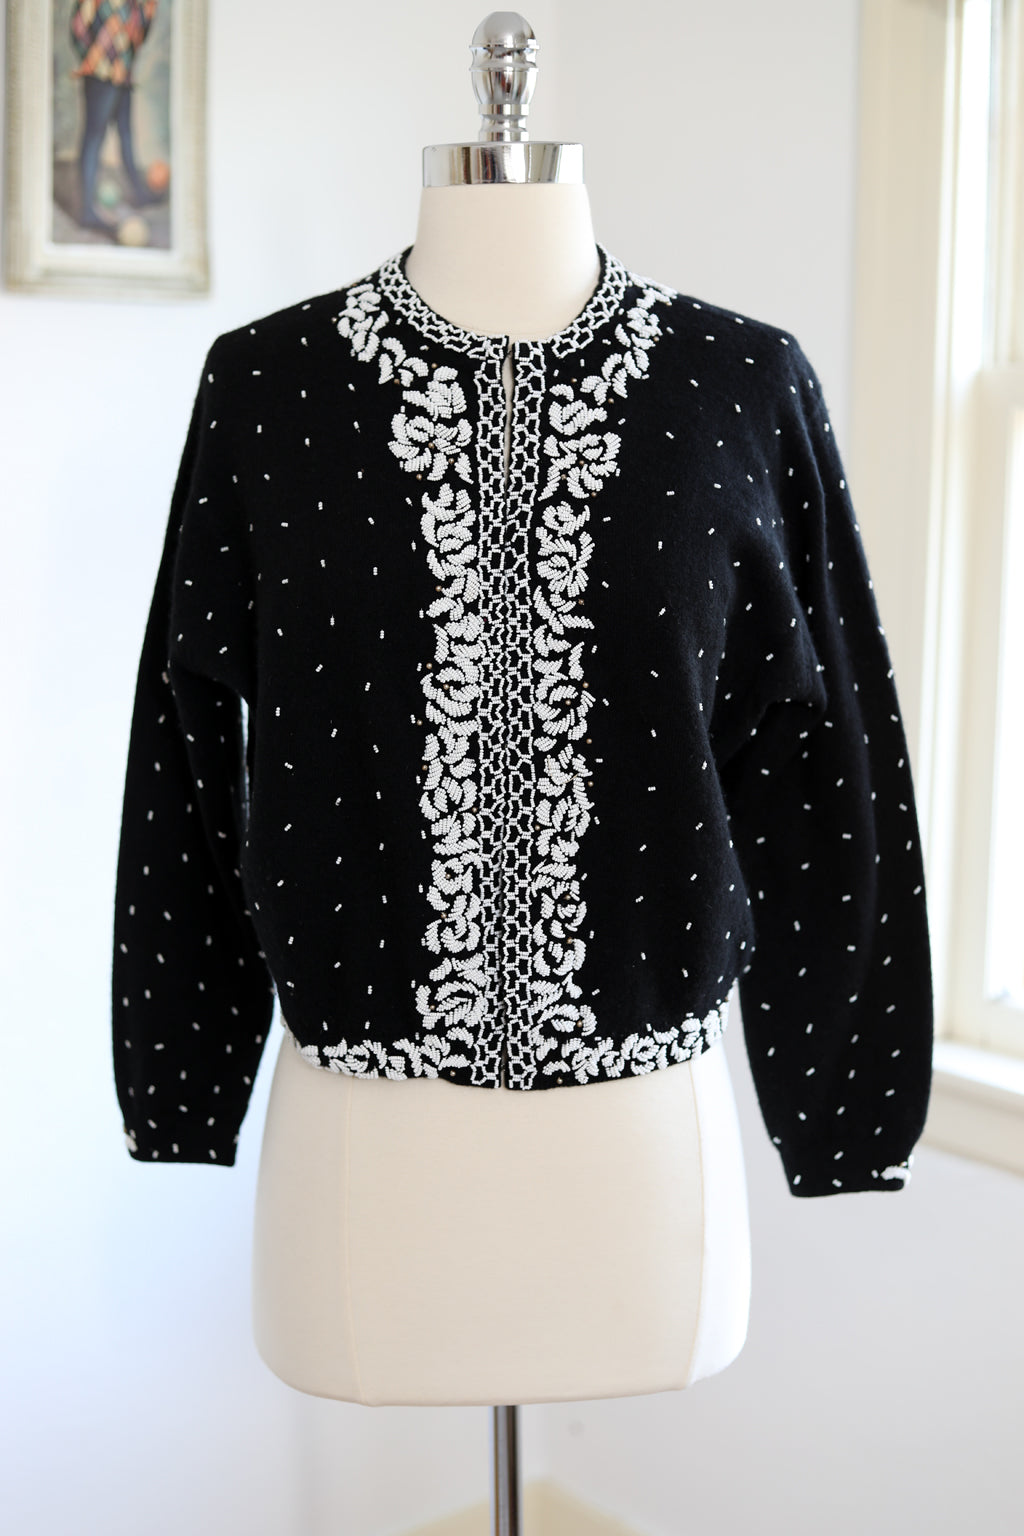 Vintage 1950s to 1960s Beaded Sweater - Gorgeous Black White Lambswool or Cashmere Cardigan w Metal Studs Size M to L